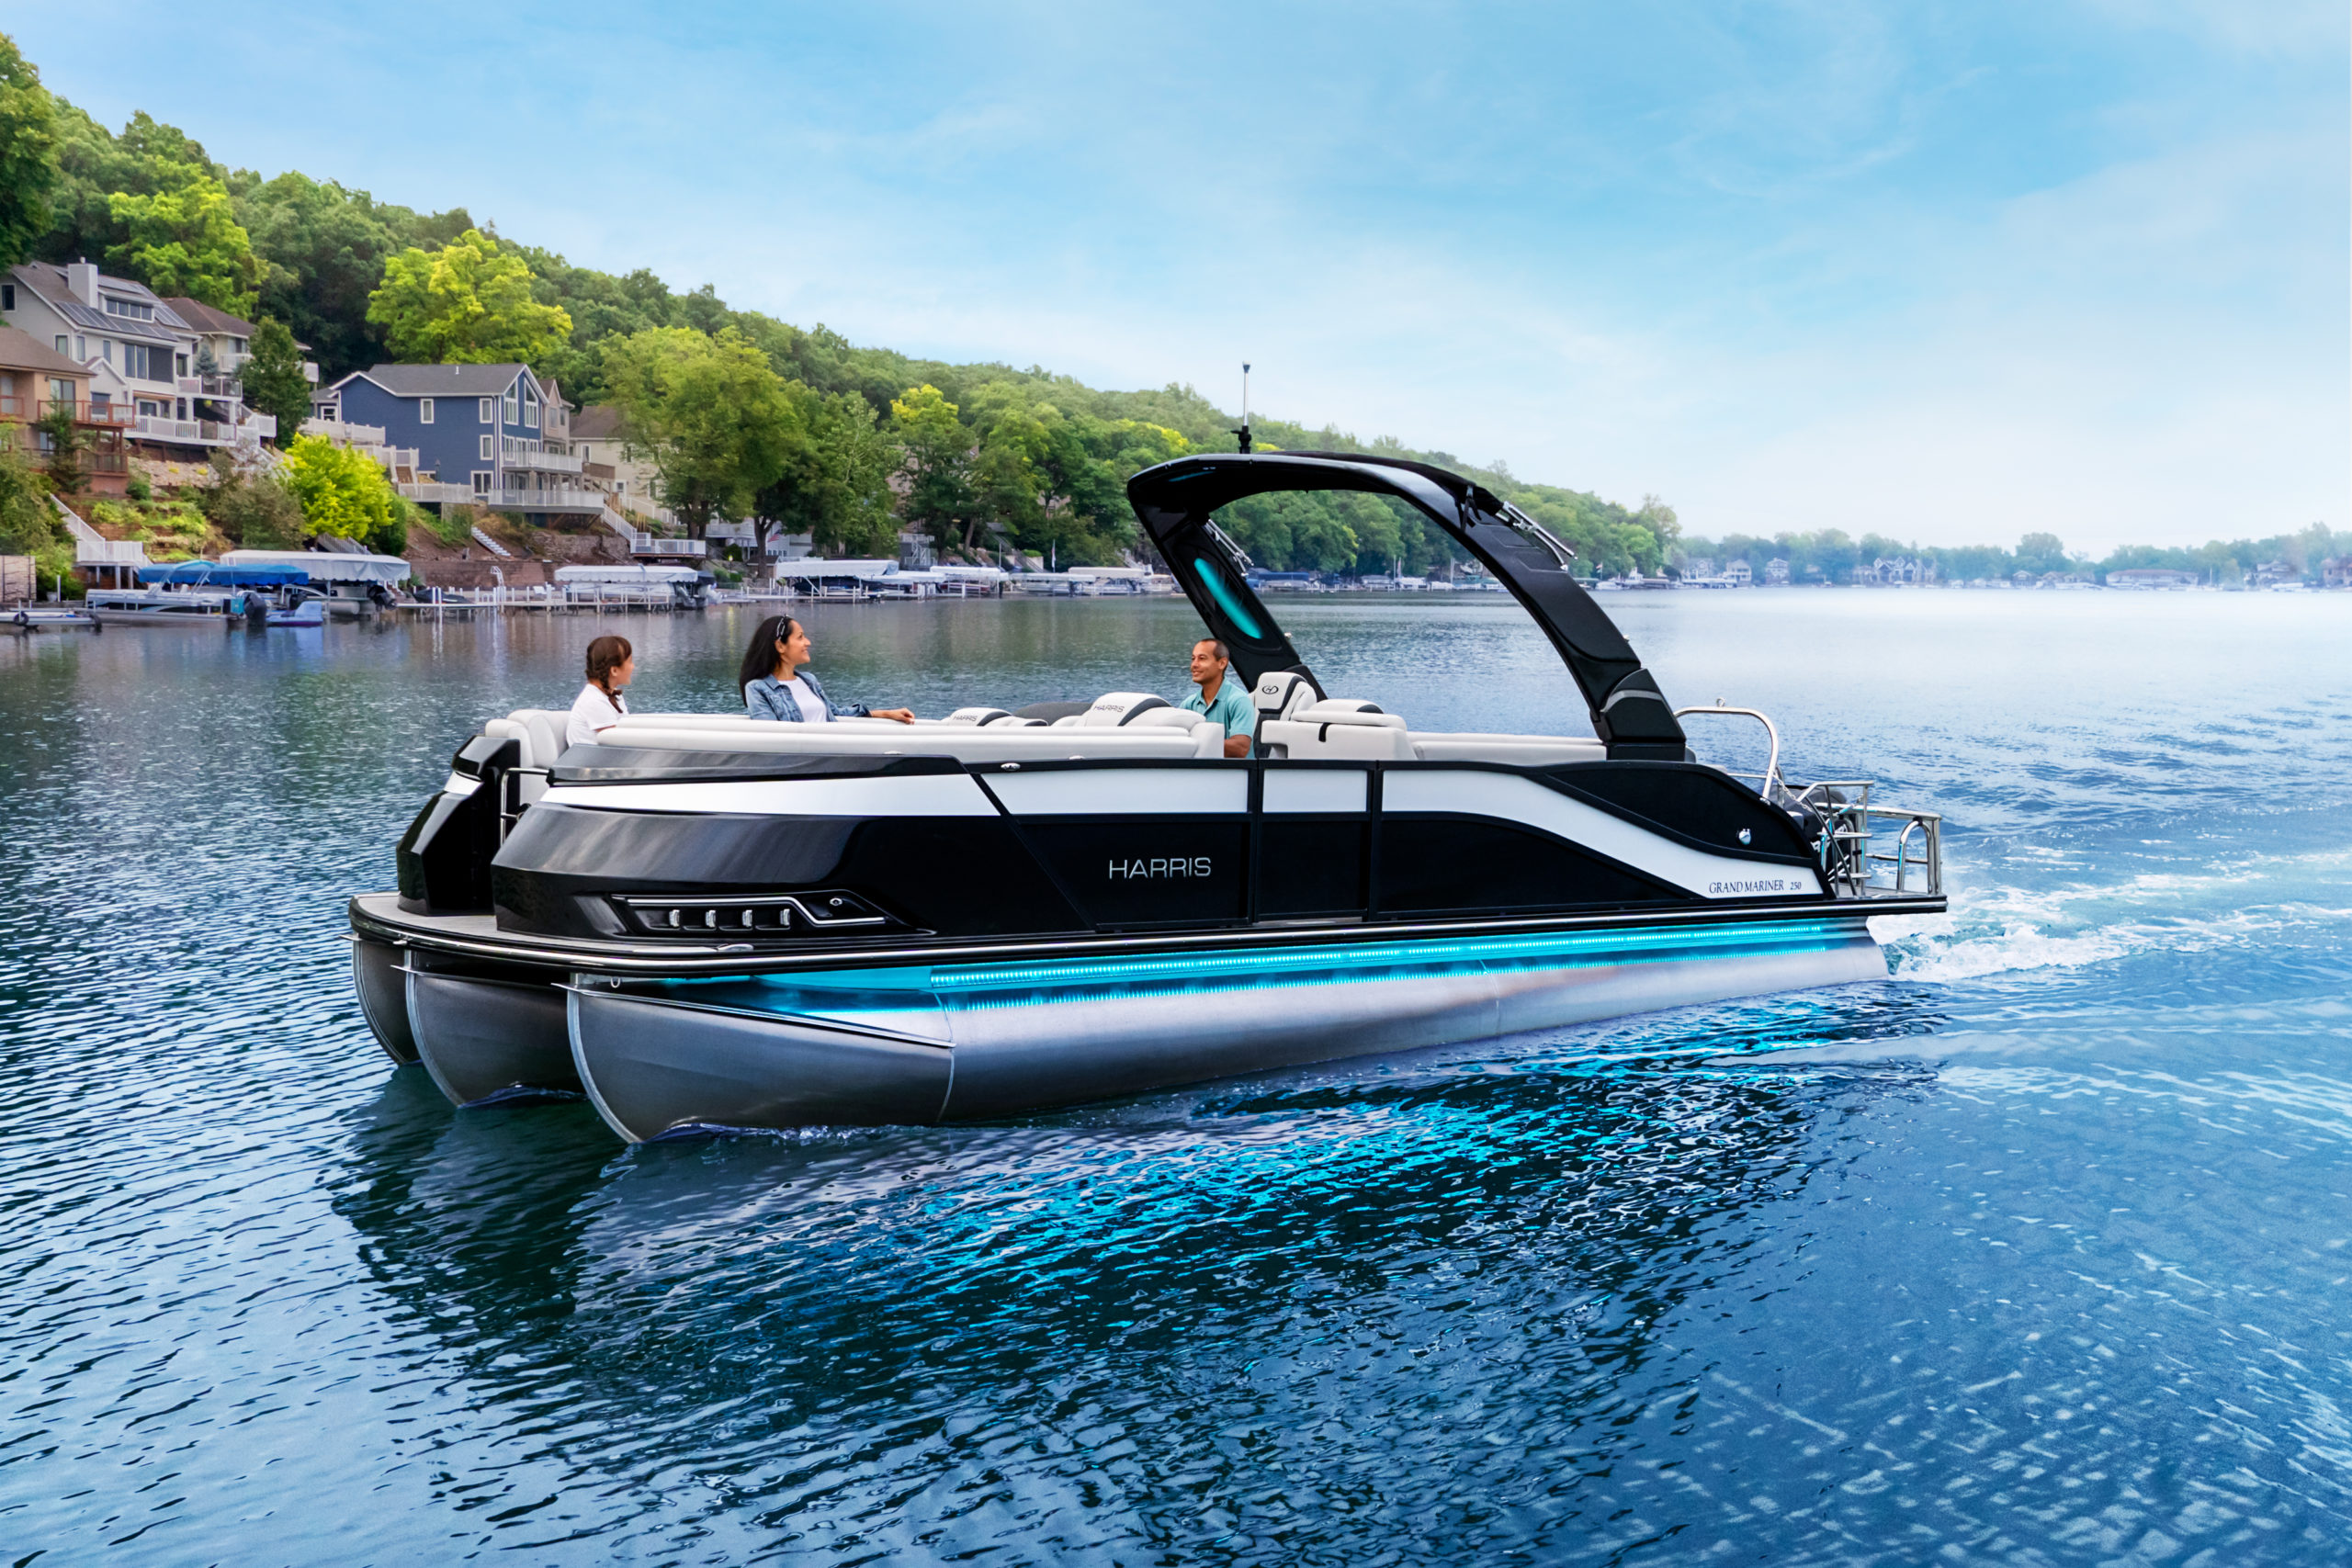 Harris Boats launches an all-new pontoon series